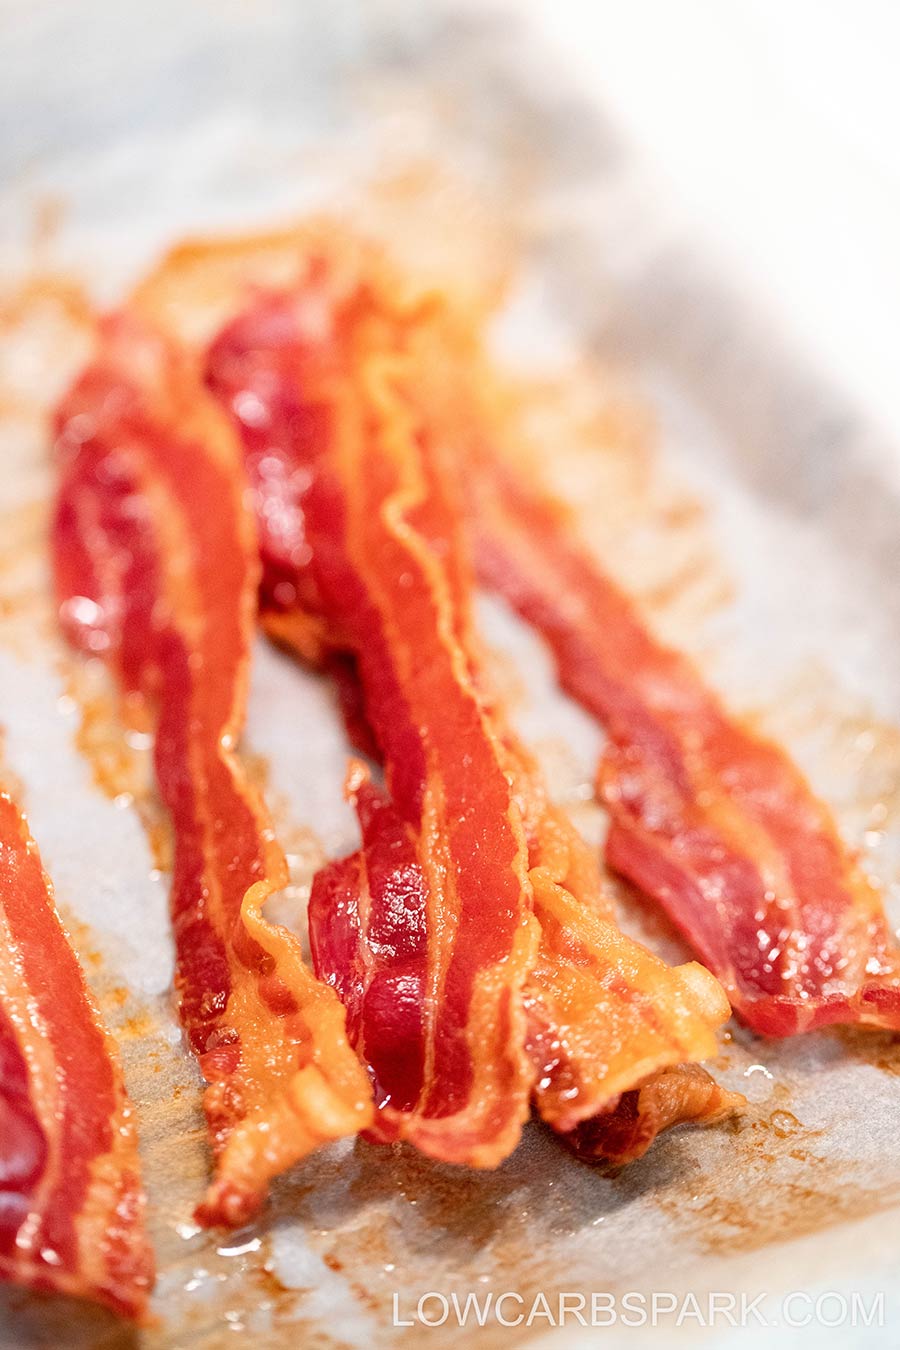 https://www.lowcarbspark.com/wp-content/uploads/2022/03/oven-baked-bacon-recipe.jpg